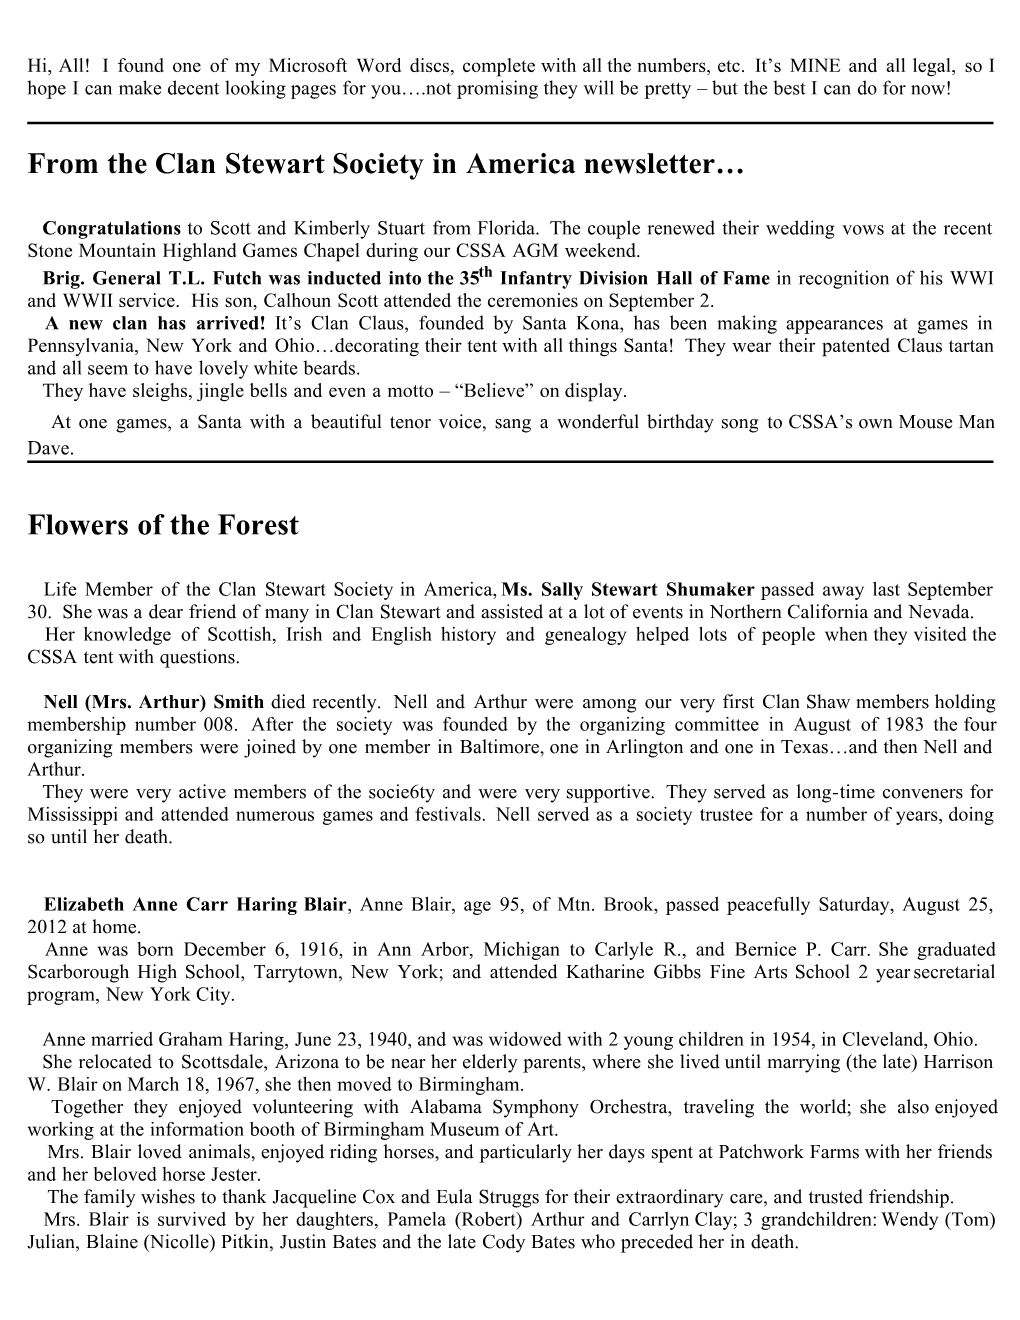 From the Clan Stewart Society in America Newsletter…